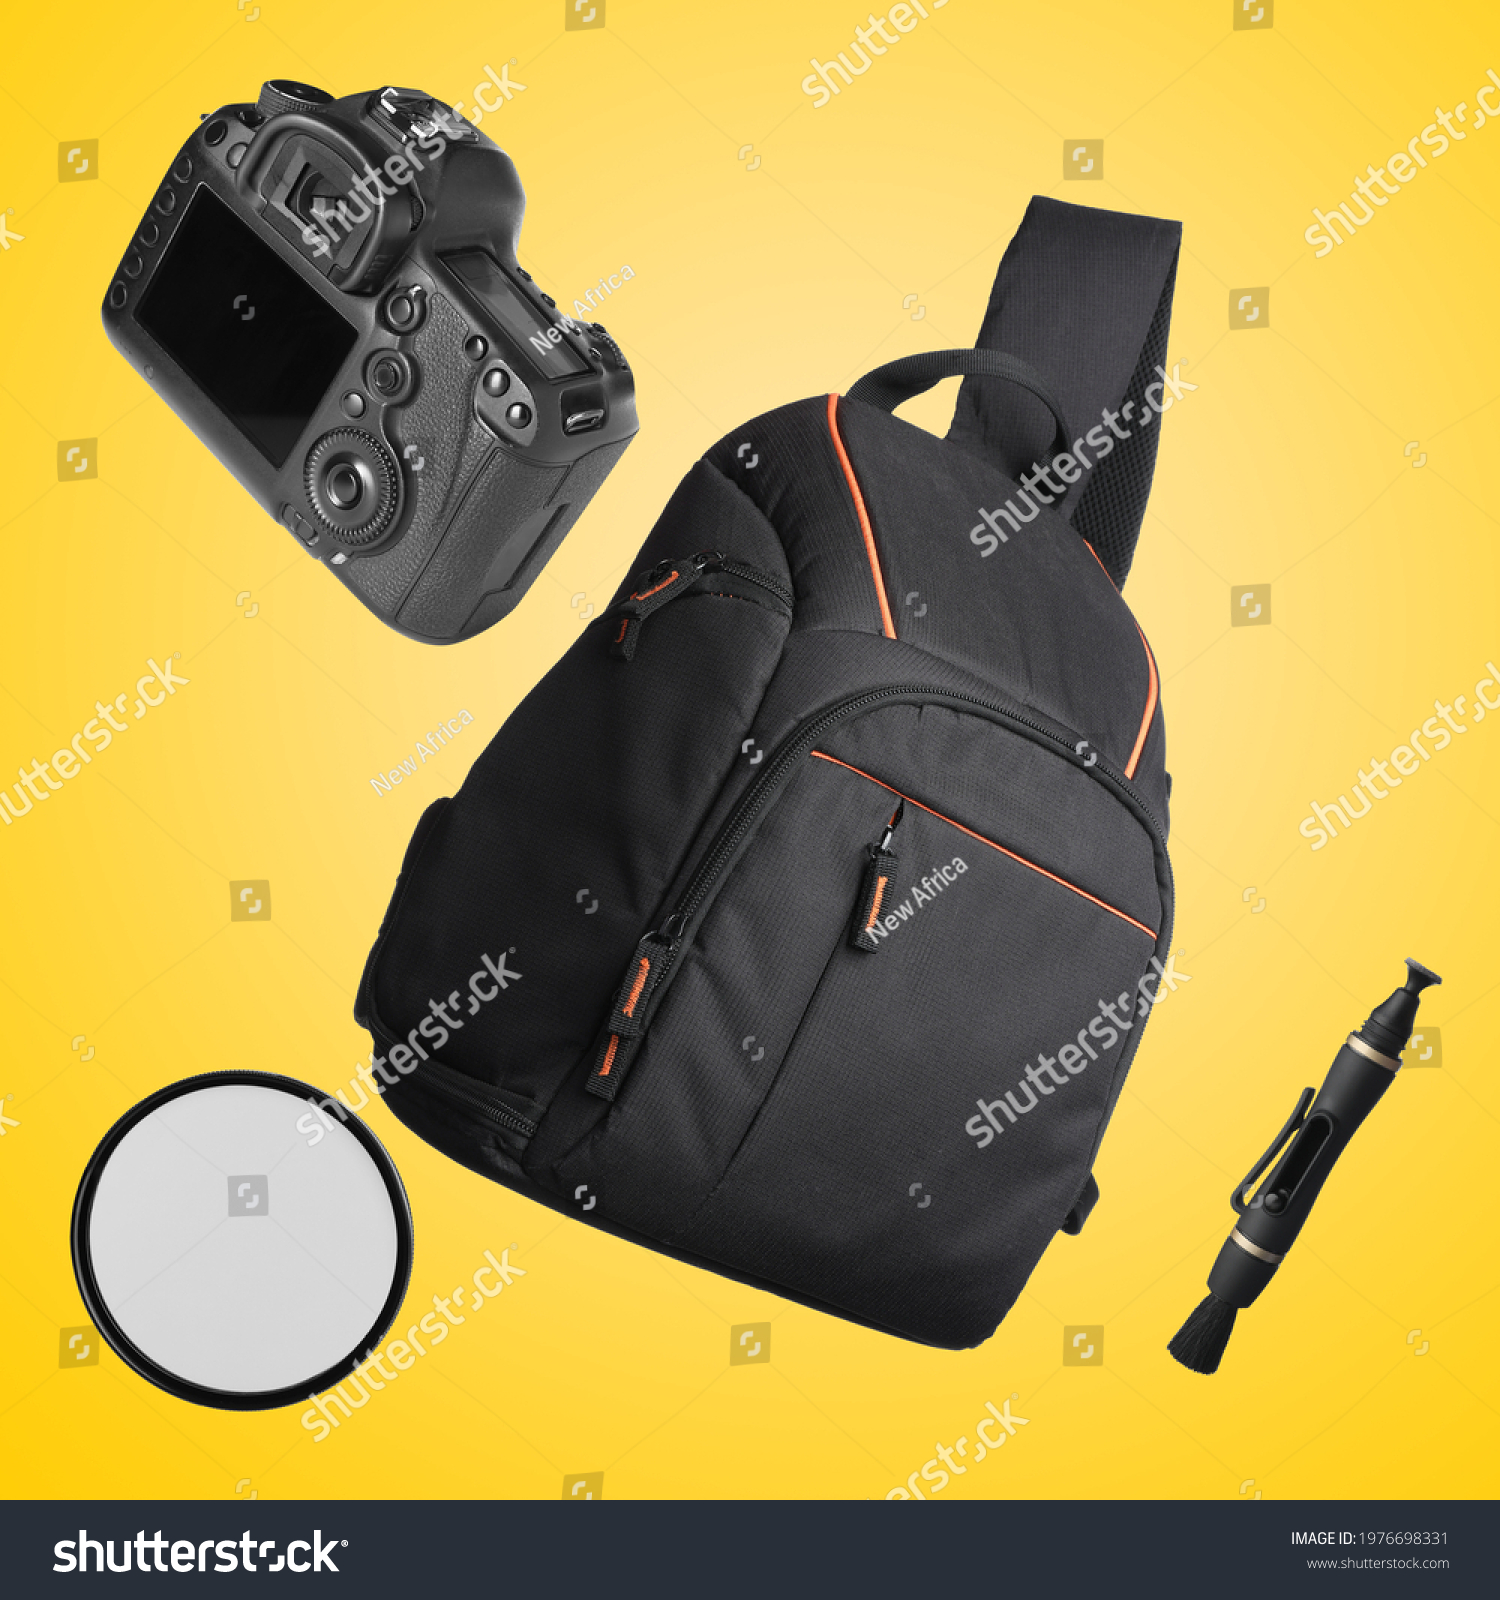 Different professional photography equipment falling on yellow background #1976698331